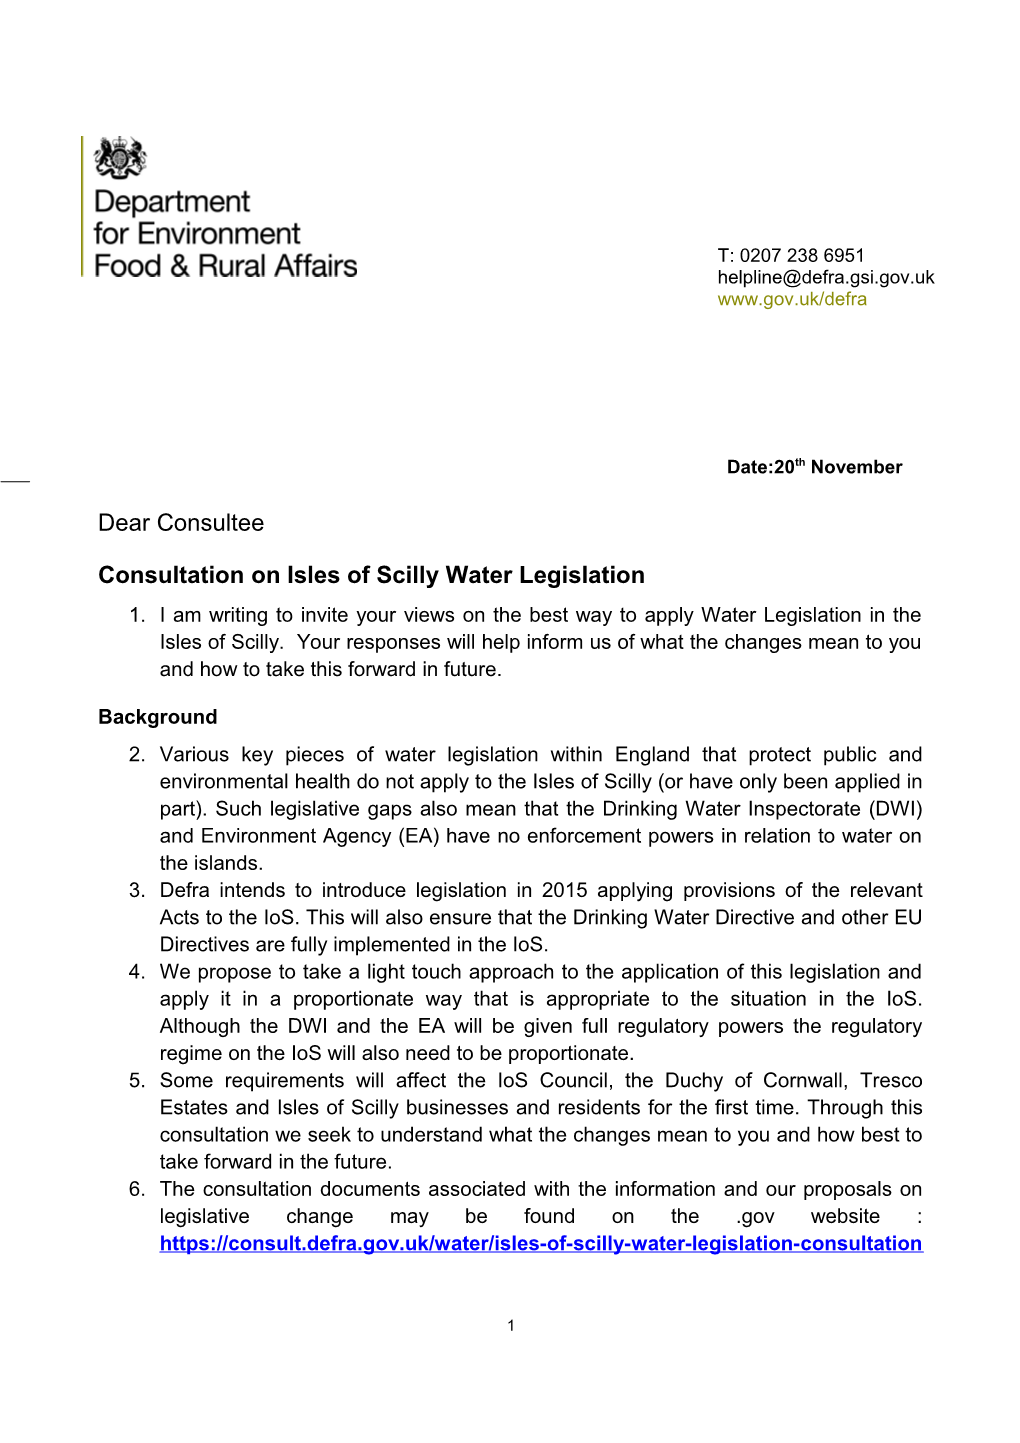 Consultation on Isles of Scilly Water Legislation